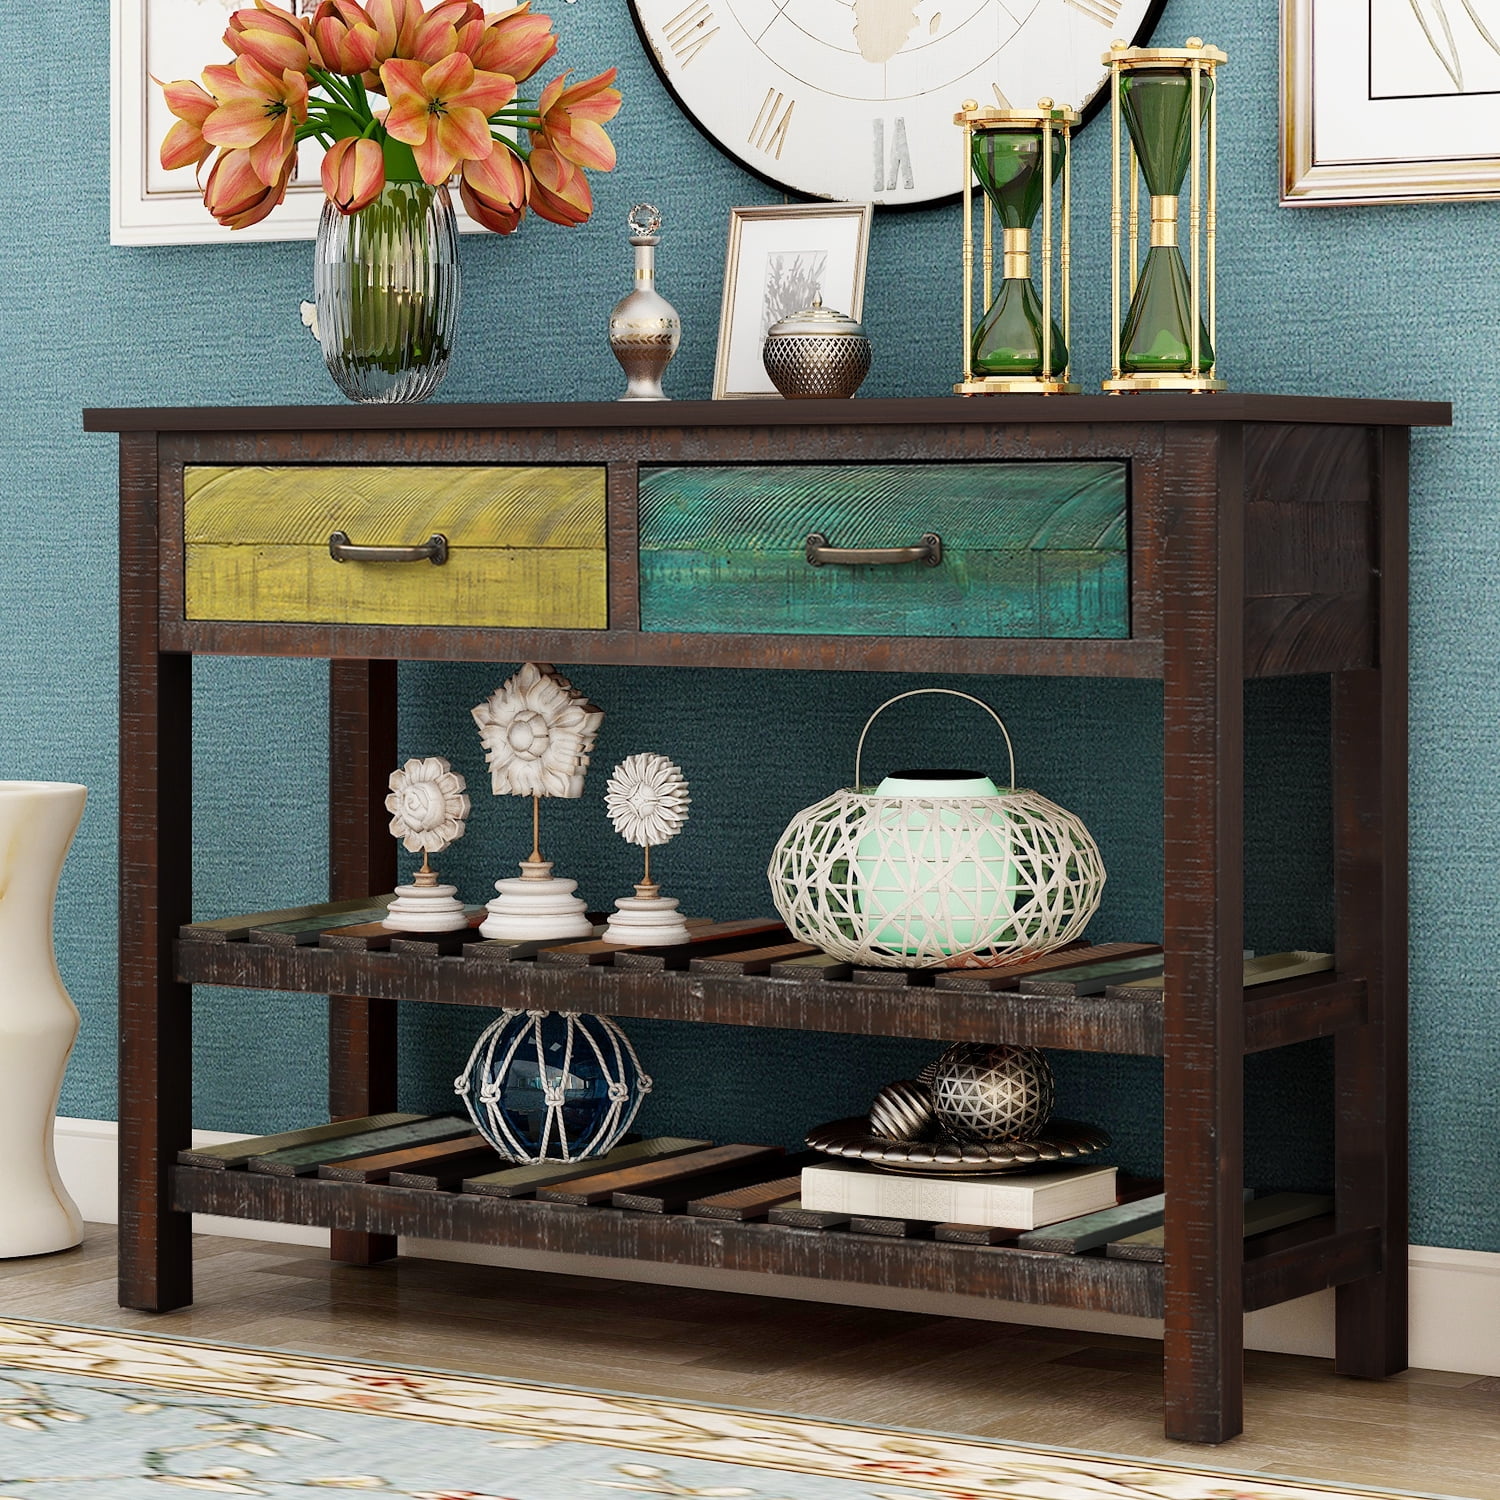 Details about   Wooden Console Table Sofa Kitchen Entryway Office Storage Furniture Multicolor 